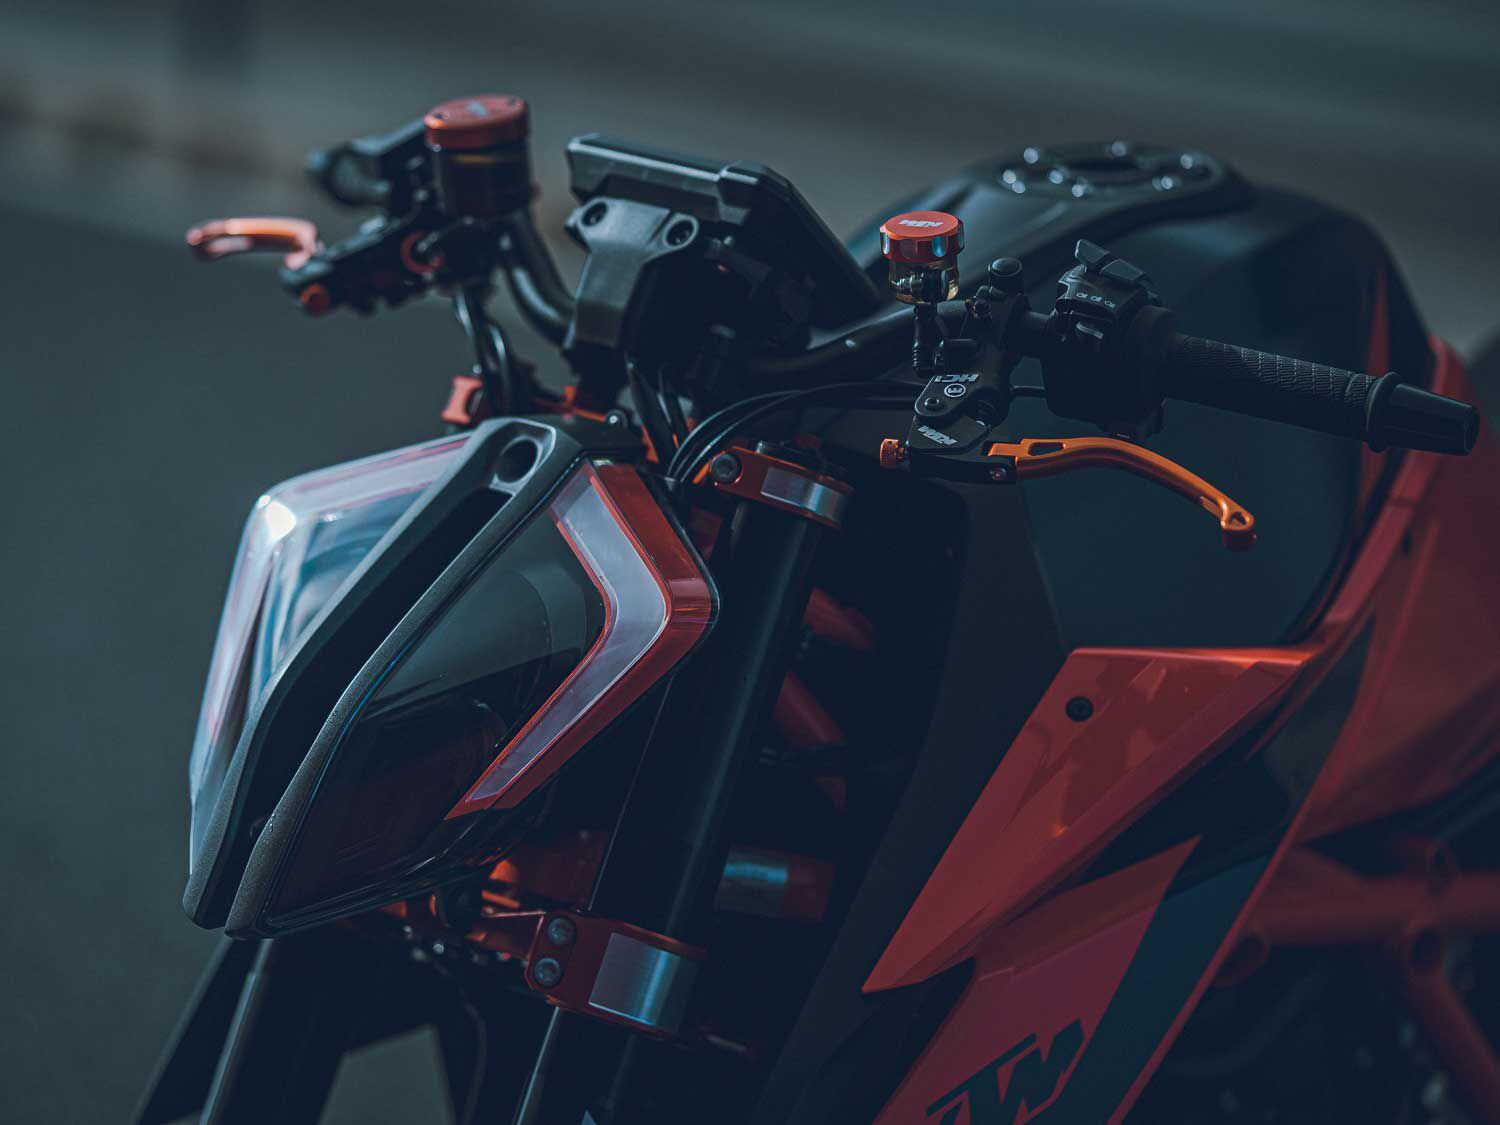 Motorcycle riders looking to make a statement will appreciate the hard-edged look but softer (in a good way) performance of the 1290 Super Duke R.